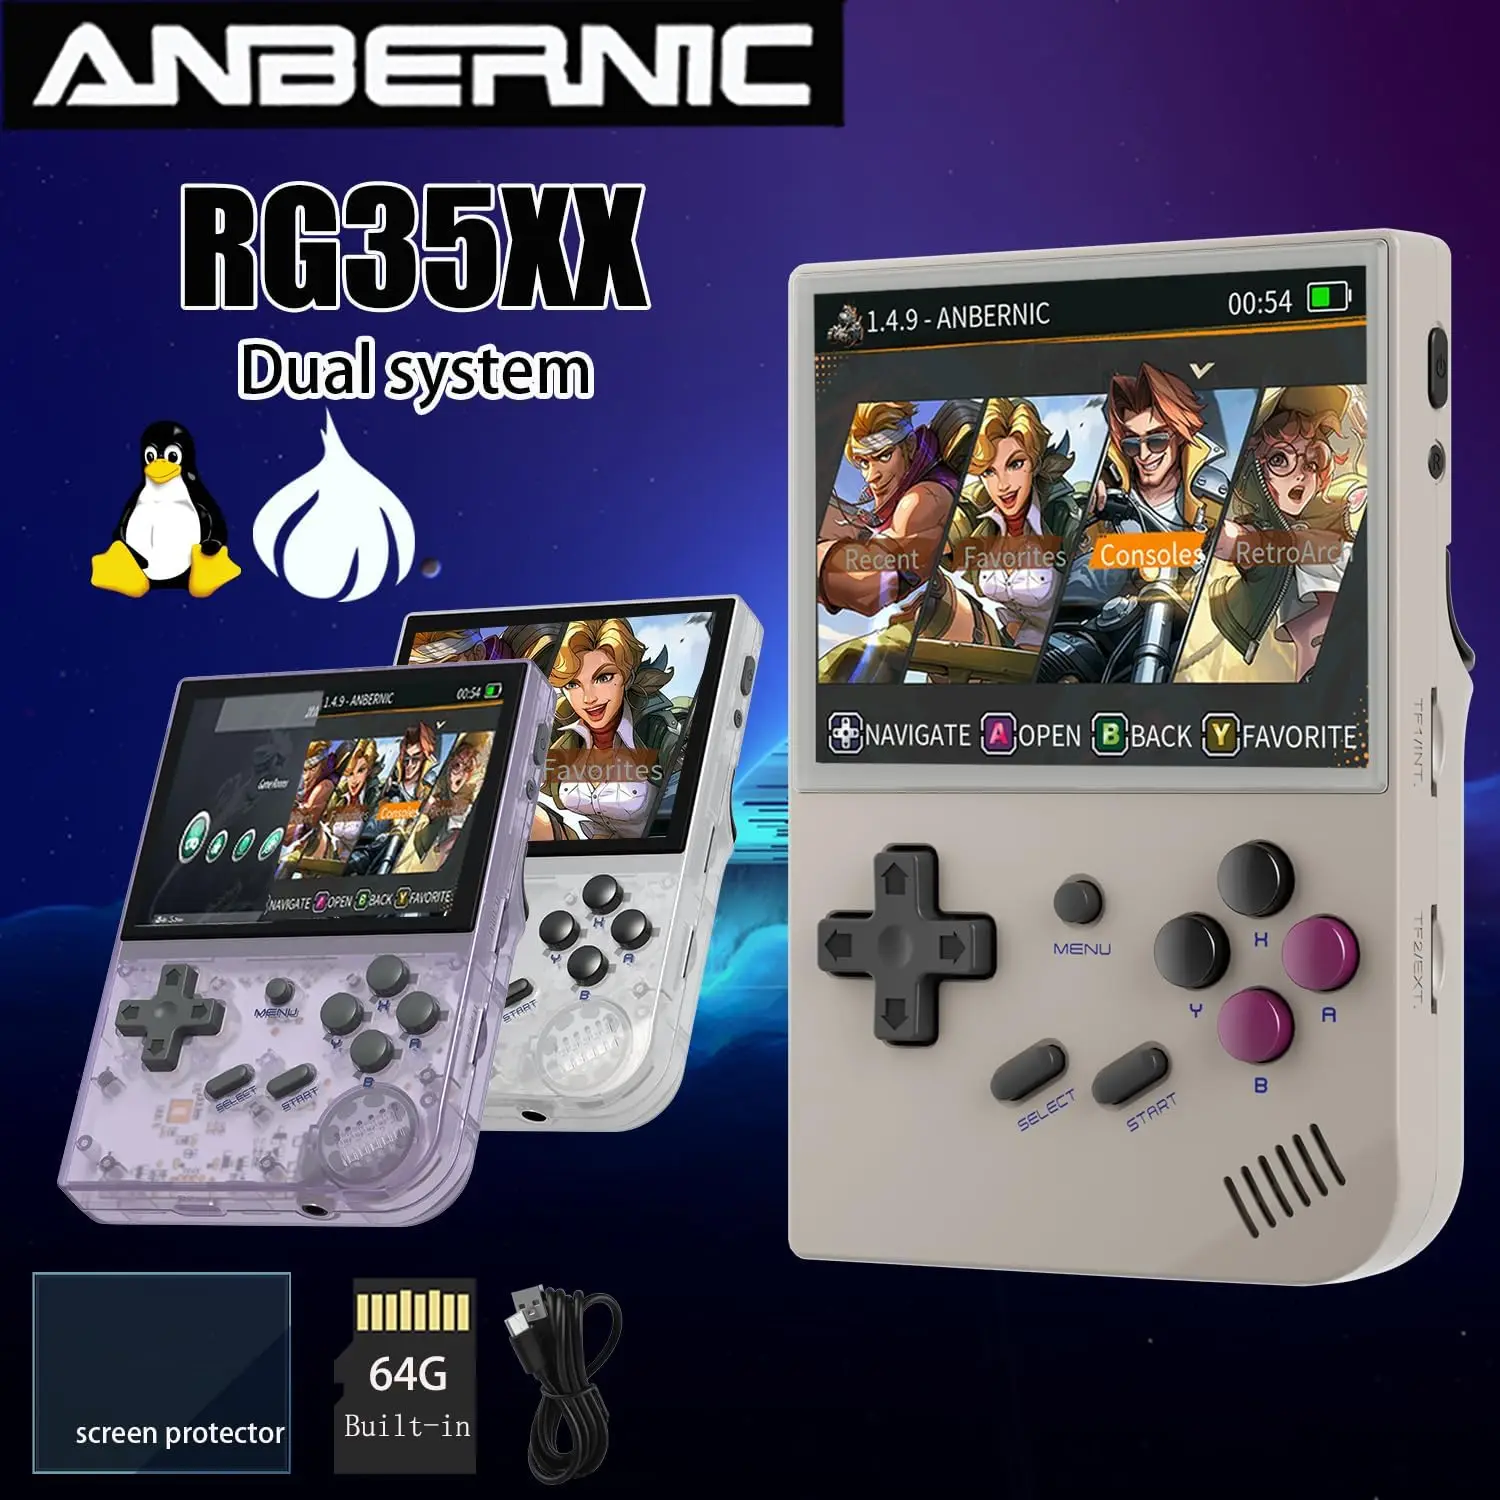 Anbernic-RG35XX-Retro-Handheld-Game-Console-Linux-and-Garlic-System-3-5-IPS-Screen-64G-5000